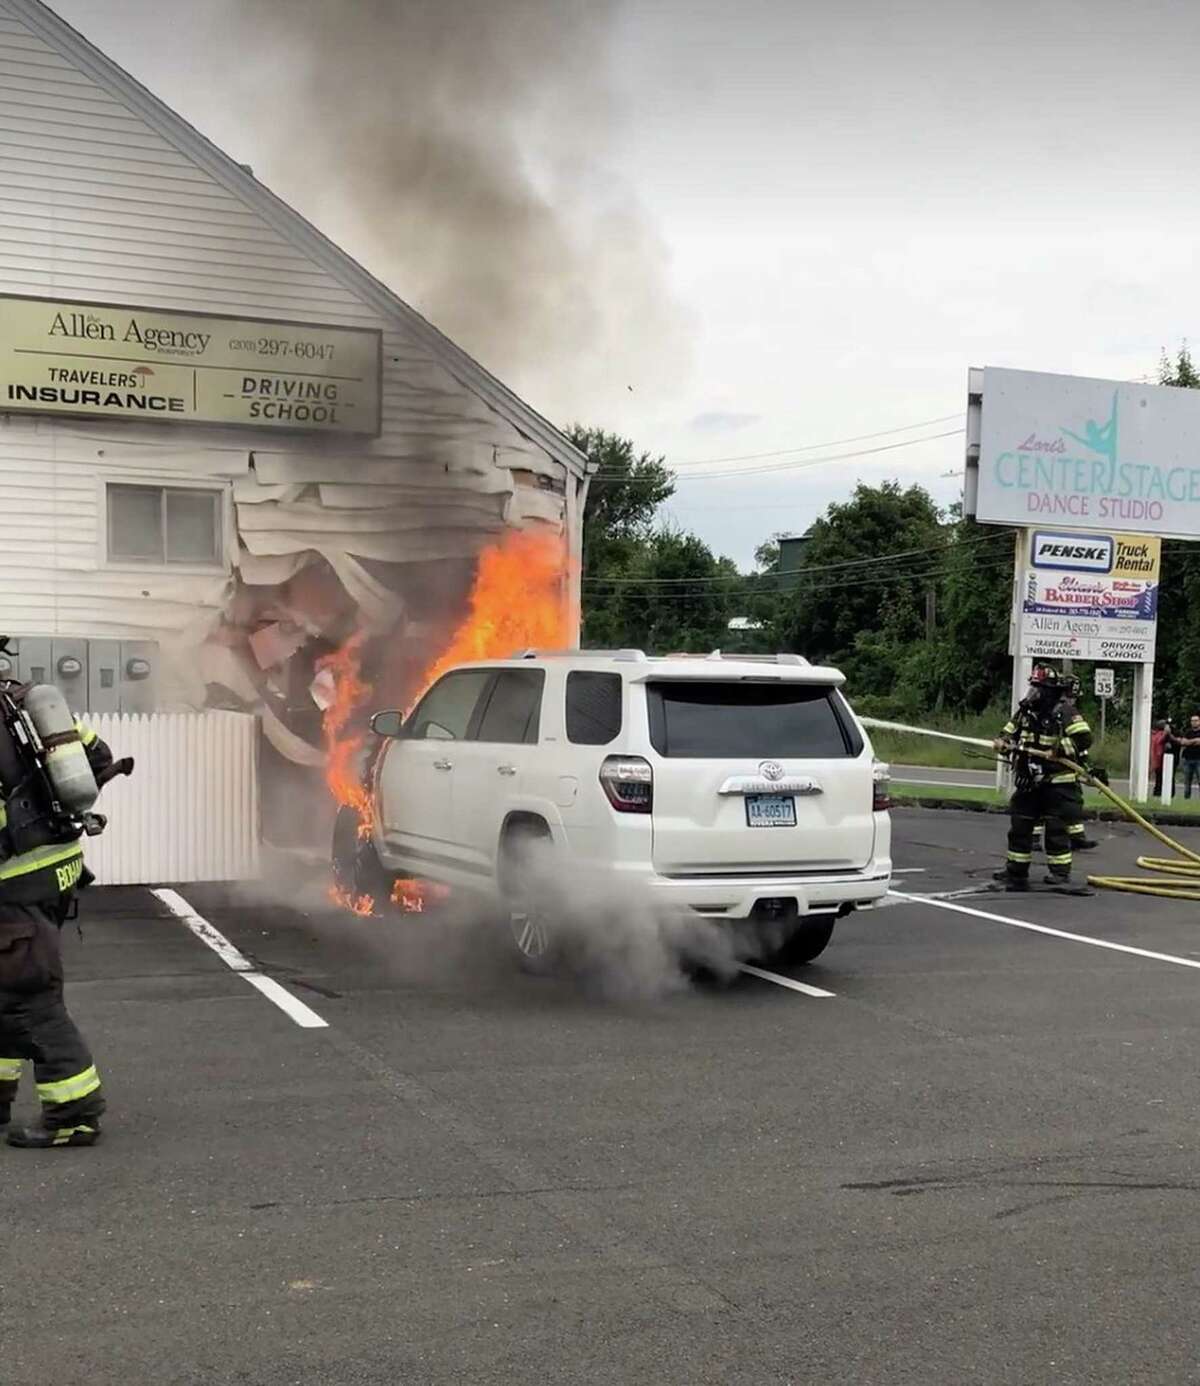 Firefighters extinguish an SUV after it caught fire in close proximity to a building on Federal Road in Danbury, Conn., Sept. 2, 2020.